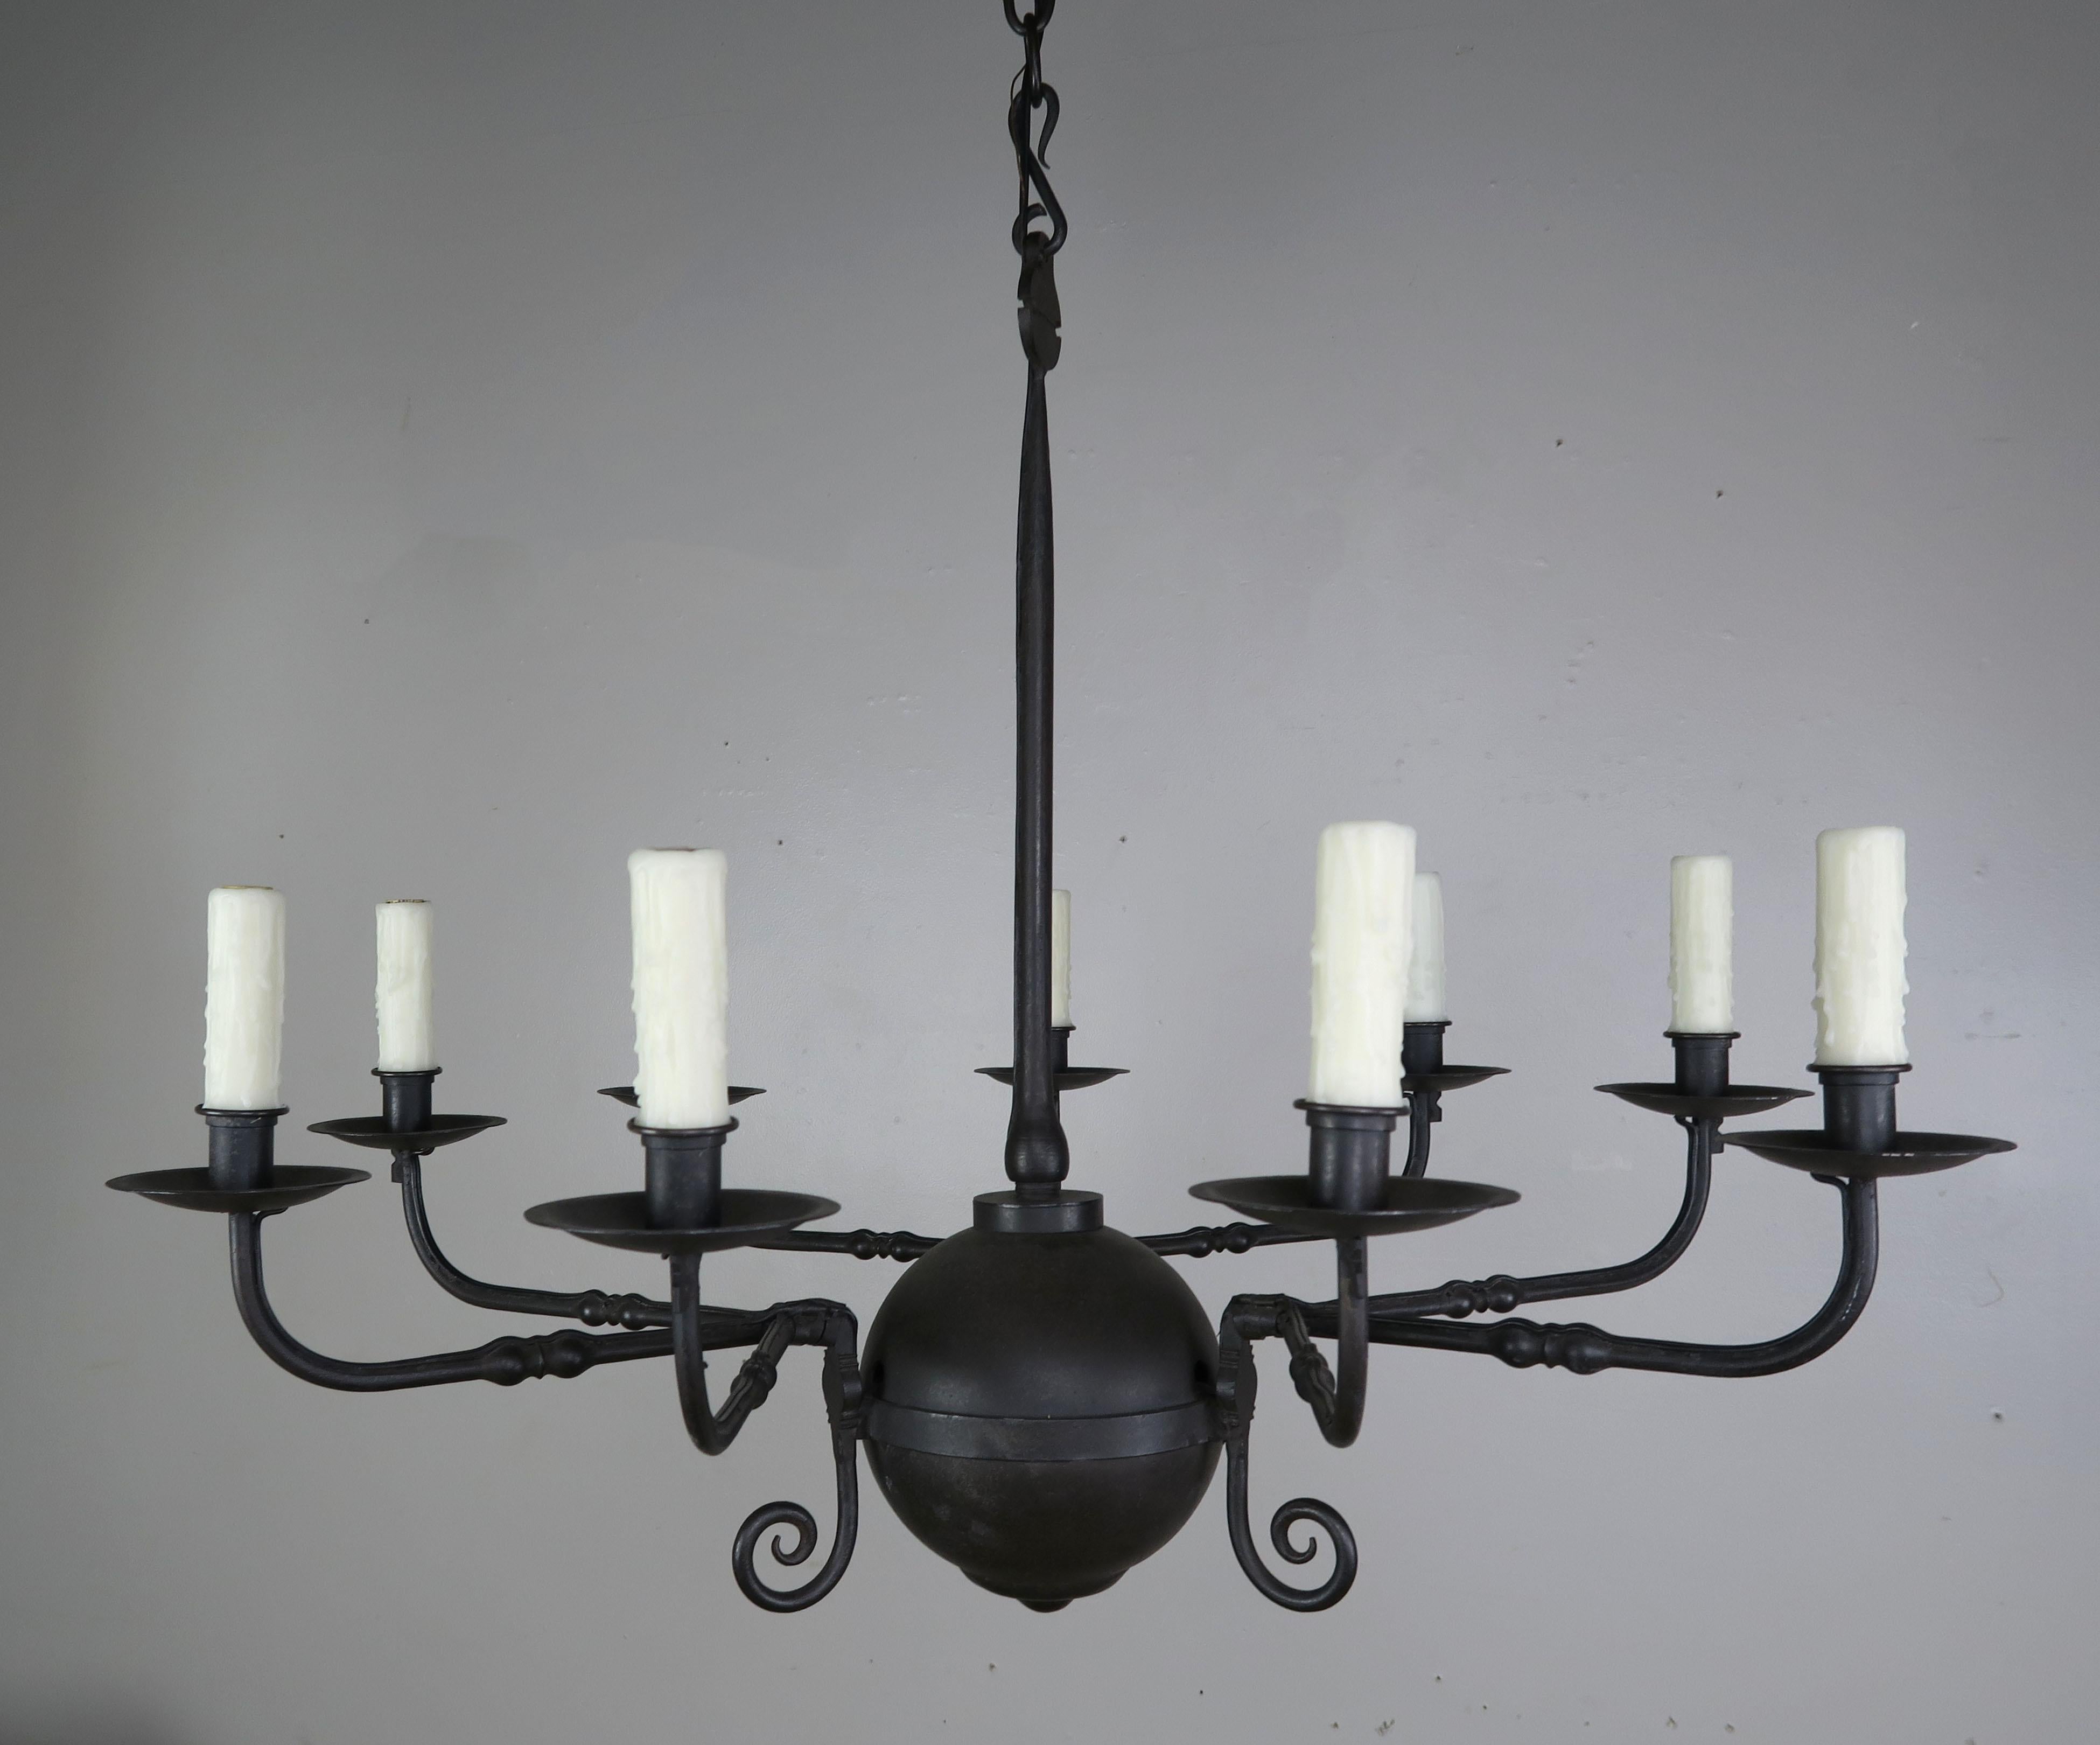 Vintage primitive style wrought iron 9-light chandelier by Paul Ferrante. The chandelier has a center sphere shape surrounded by hand wrought iron arms grouped in three and detailed with center knots. The fixture has been newly rewired with drip wax